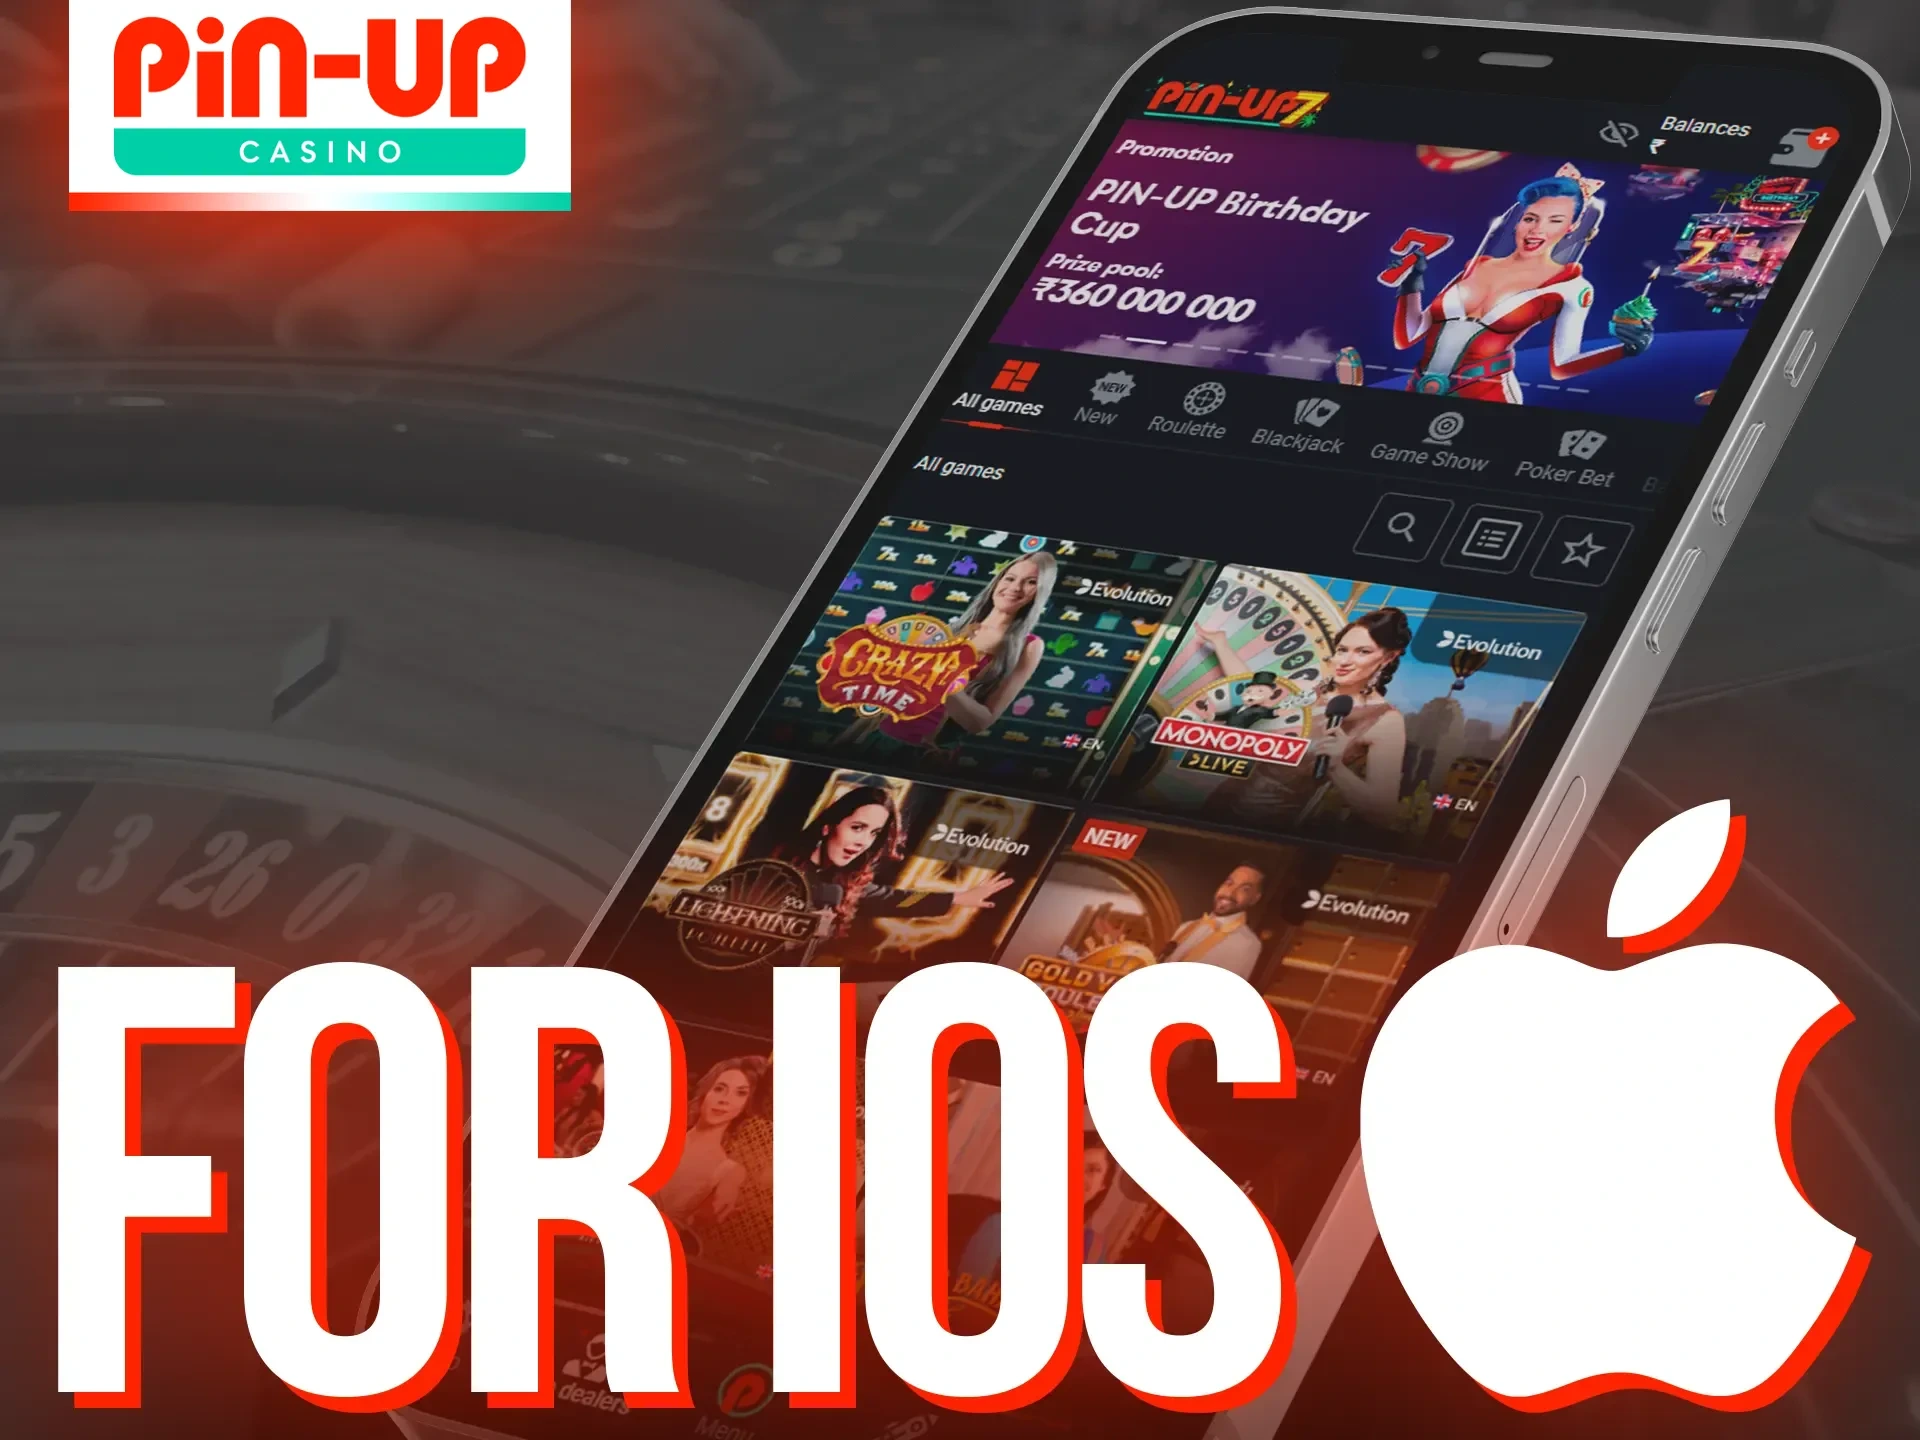 Play online casino Pin-Up from your iOS device.